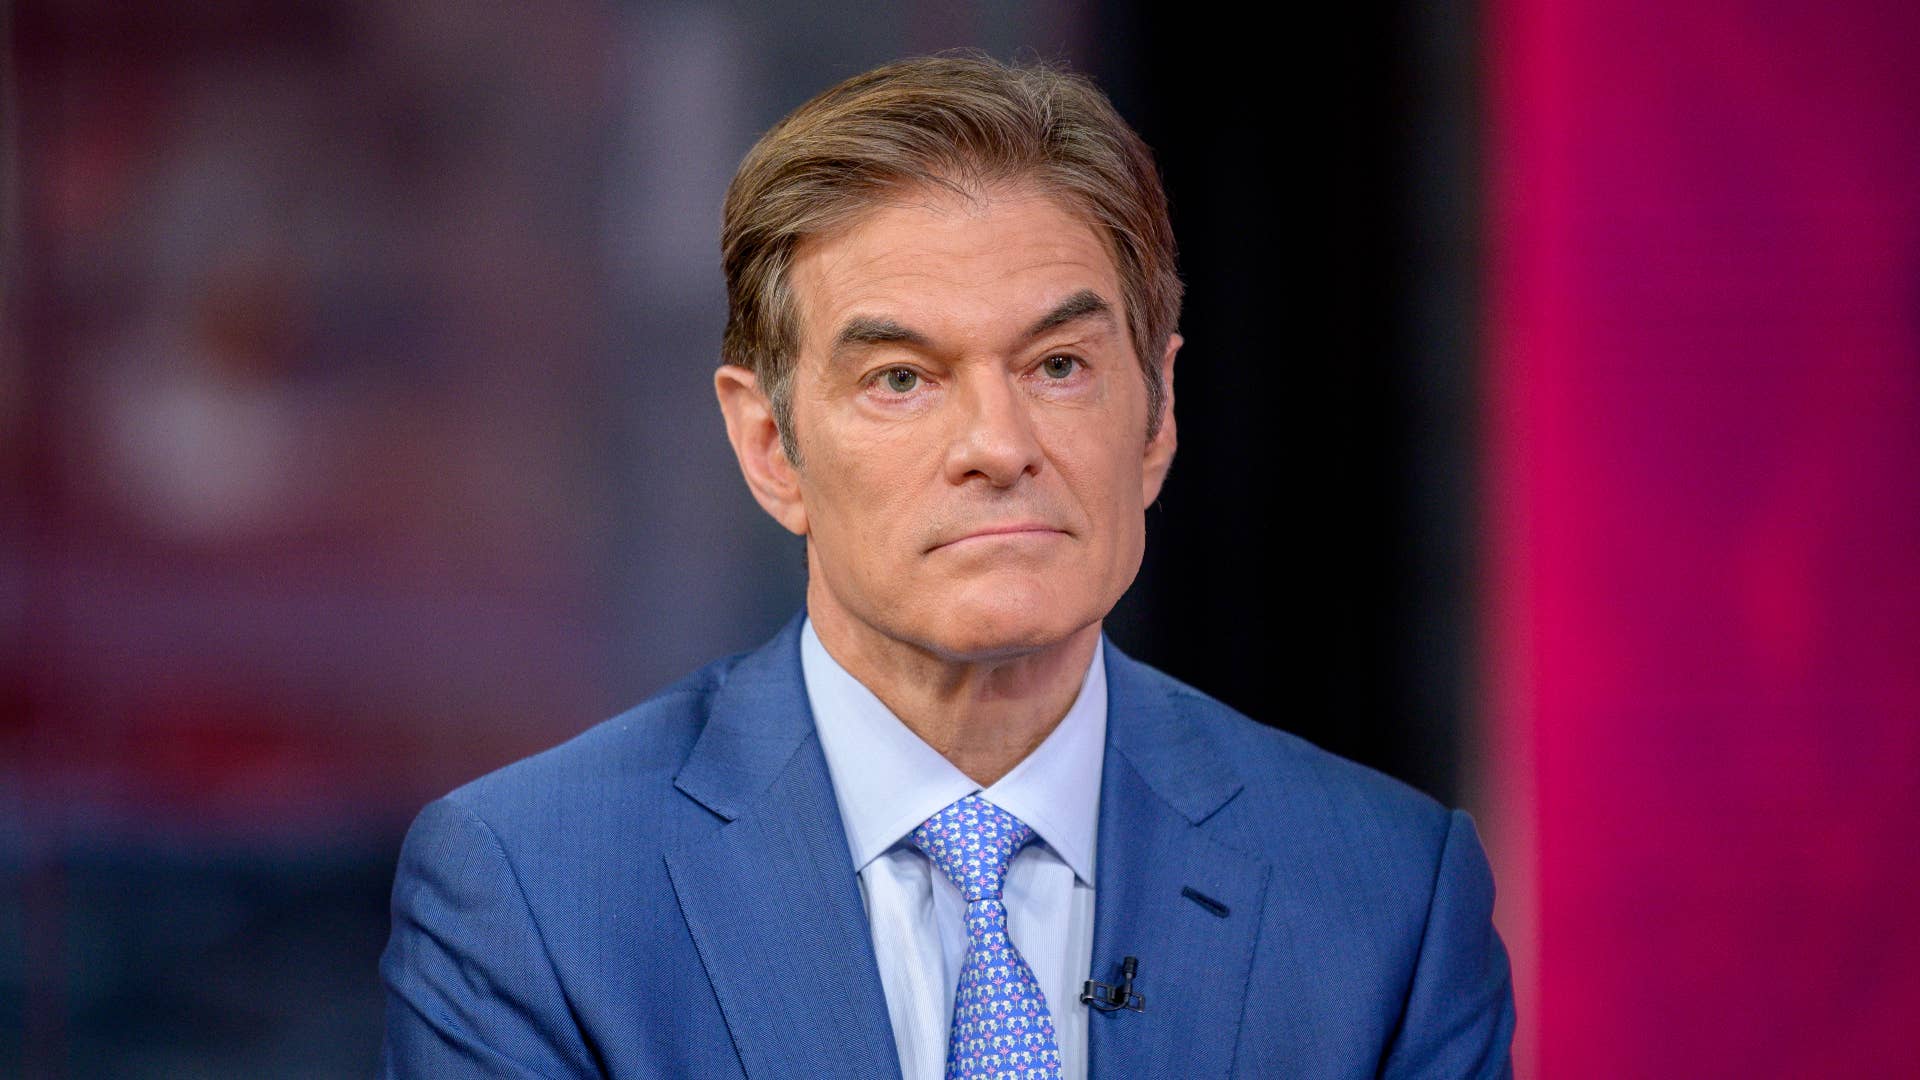 Dr. Oz visits "Outnumbered Overtime with Harris Faulkner."